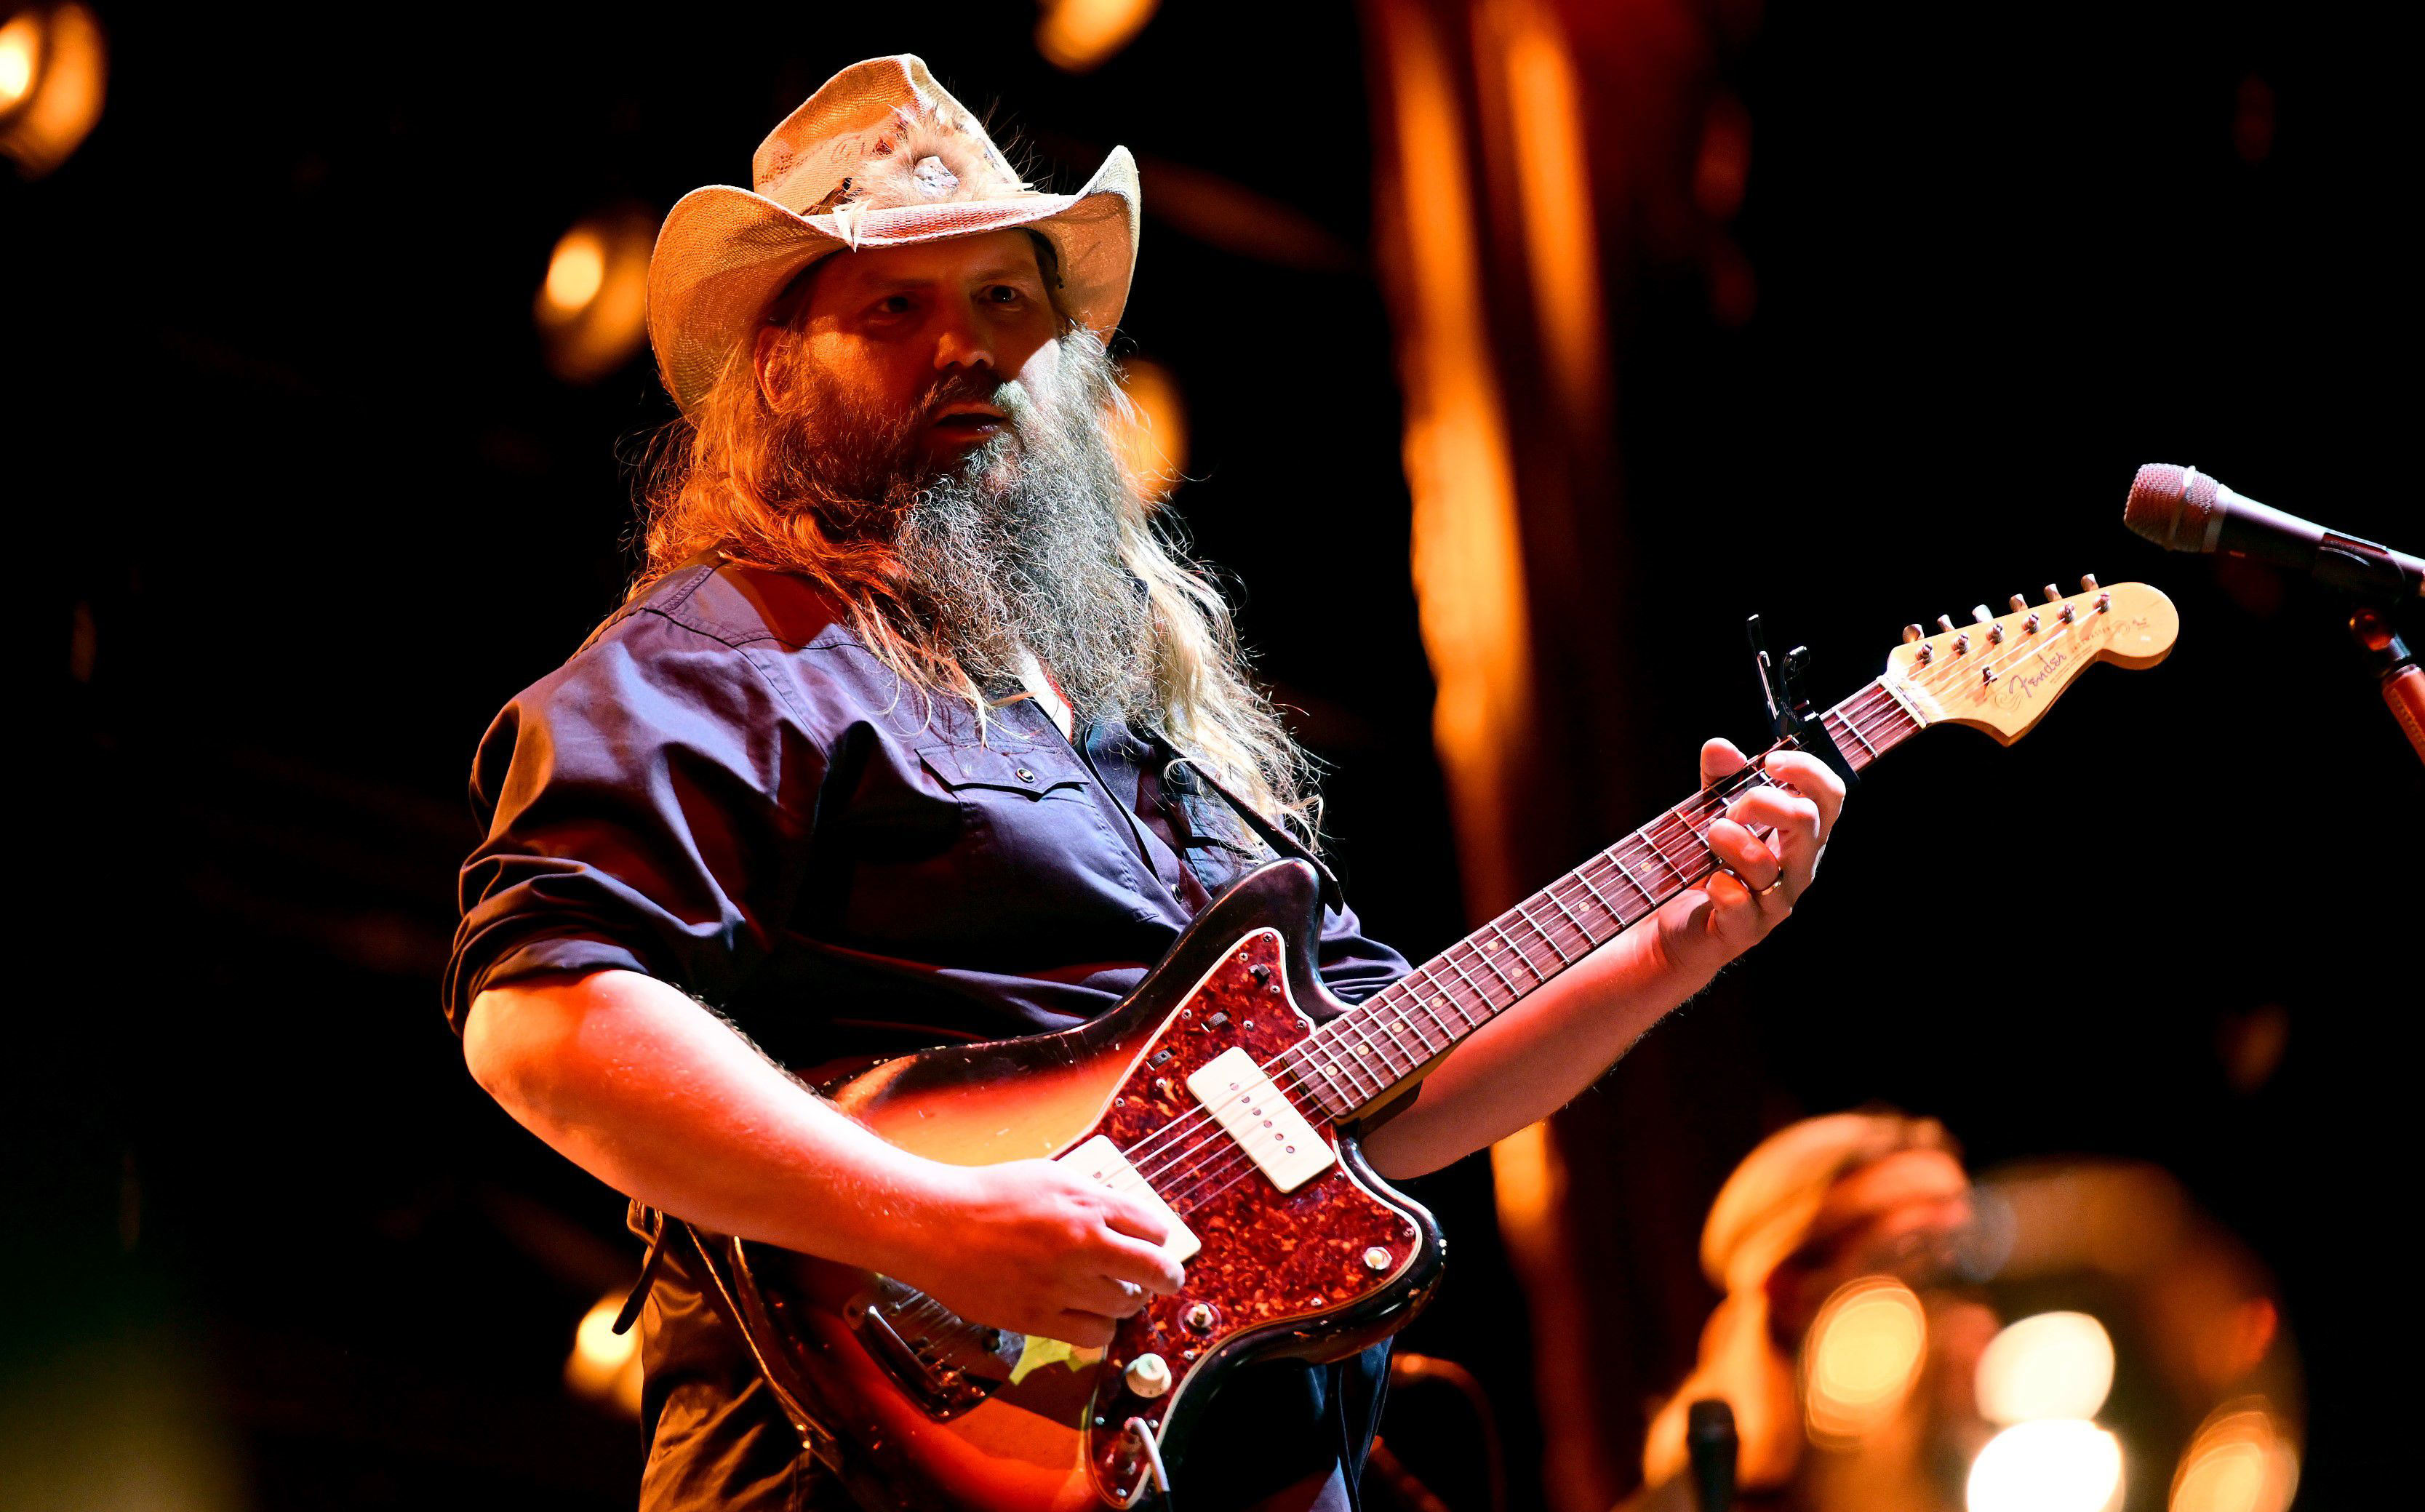 Chris Stapleton coming to Pittsburgh area on ‘AllAmerican Road Show’ tour